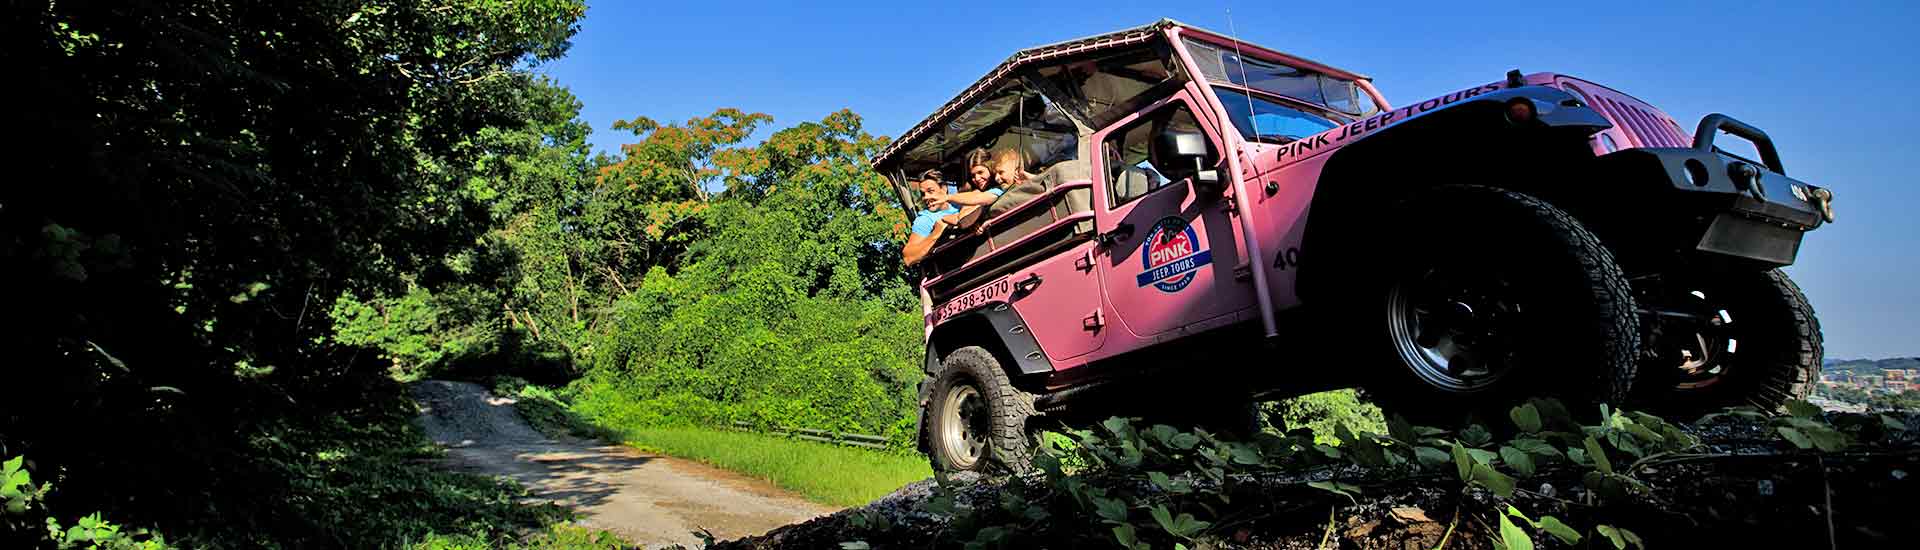 Pink Jeep climbing steep hill surrounded by lush green forest and blue sky with late afternoon shade, Pigeon Forge